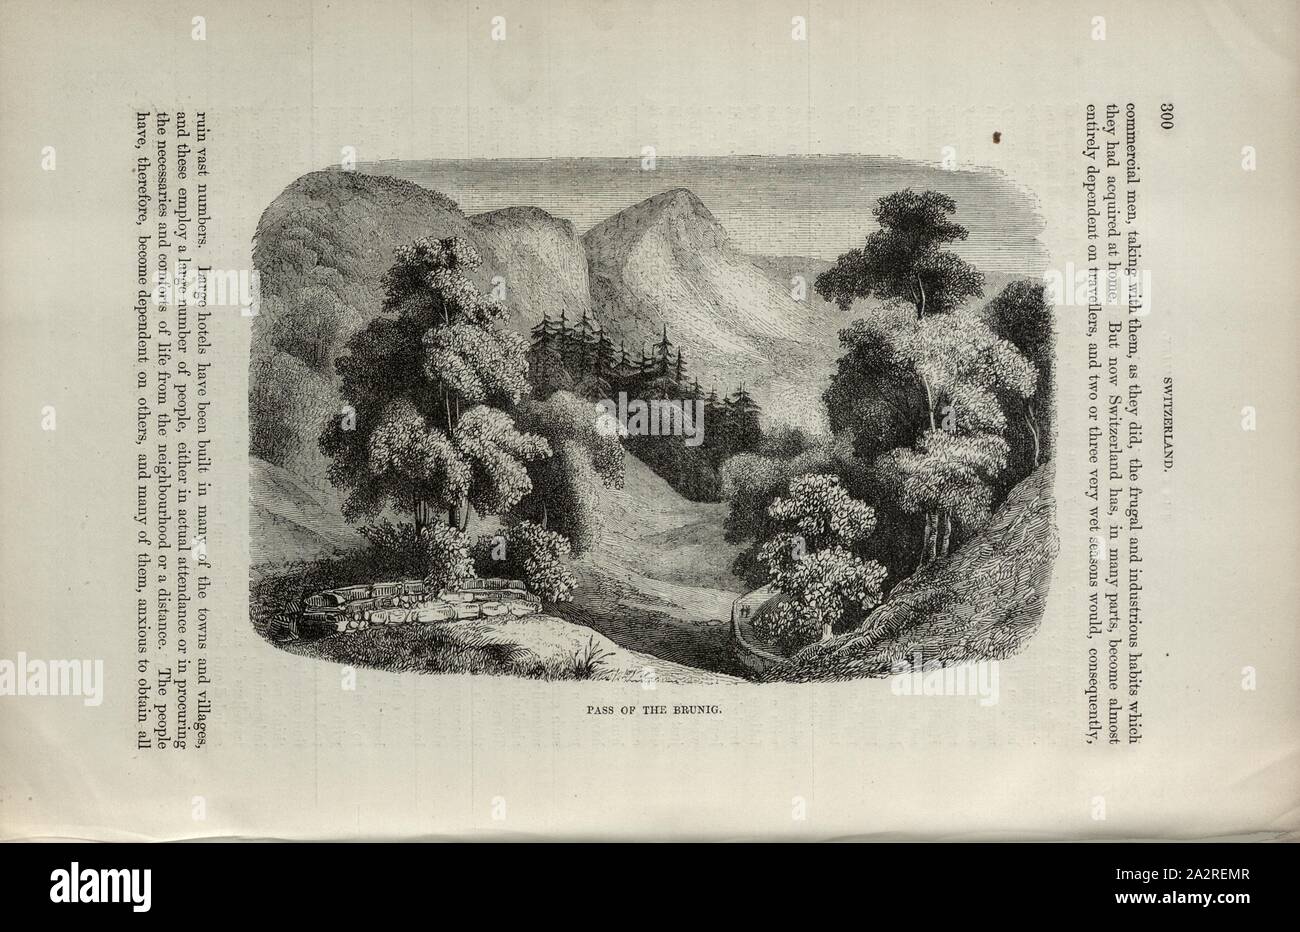 Pass of the Brunig, Brünigpass, p. 300, 1854, Charles Williams, The Alps, Switzerland, and the North of Italy. London: Cassell, 1854 Stock Photo